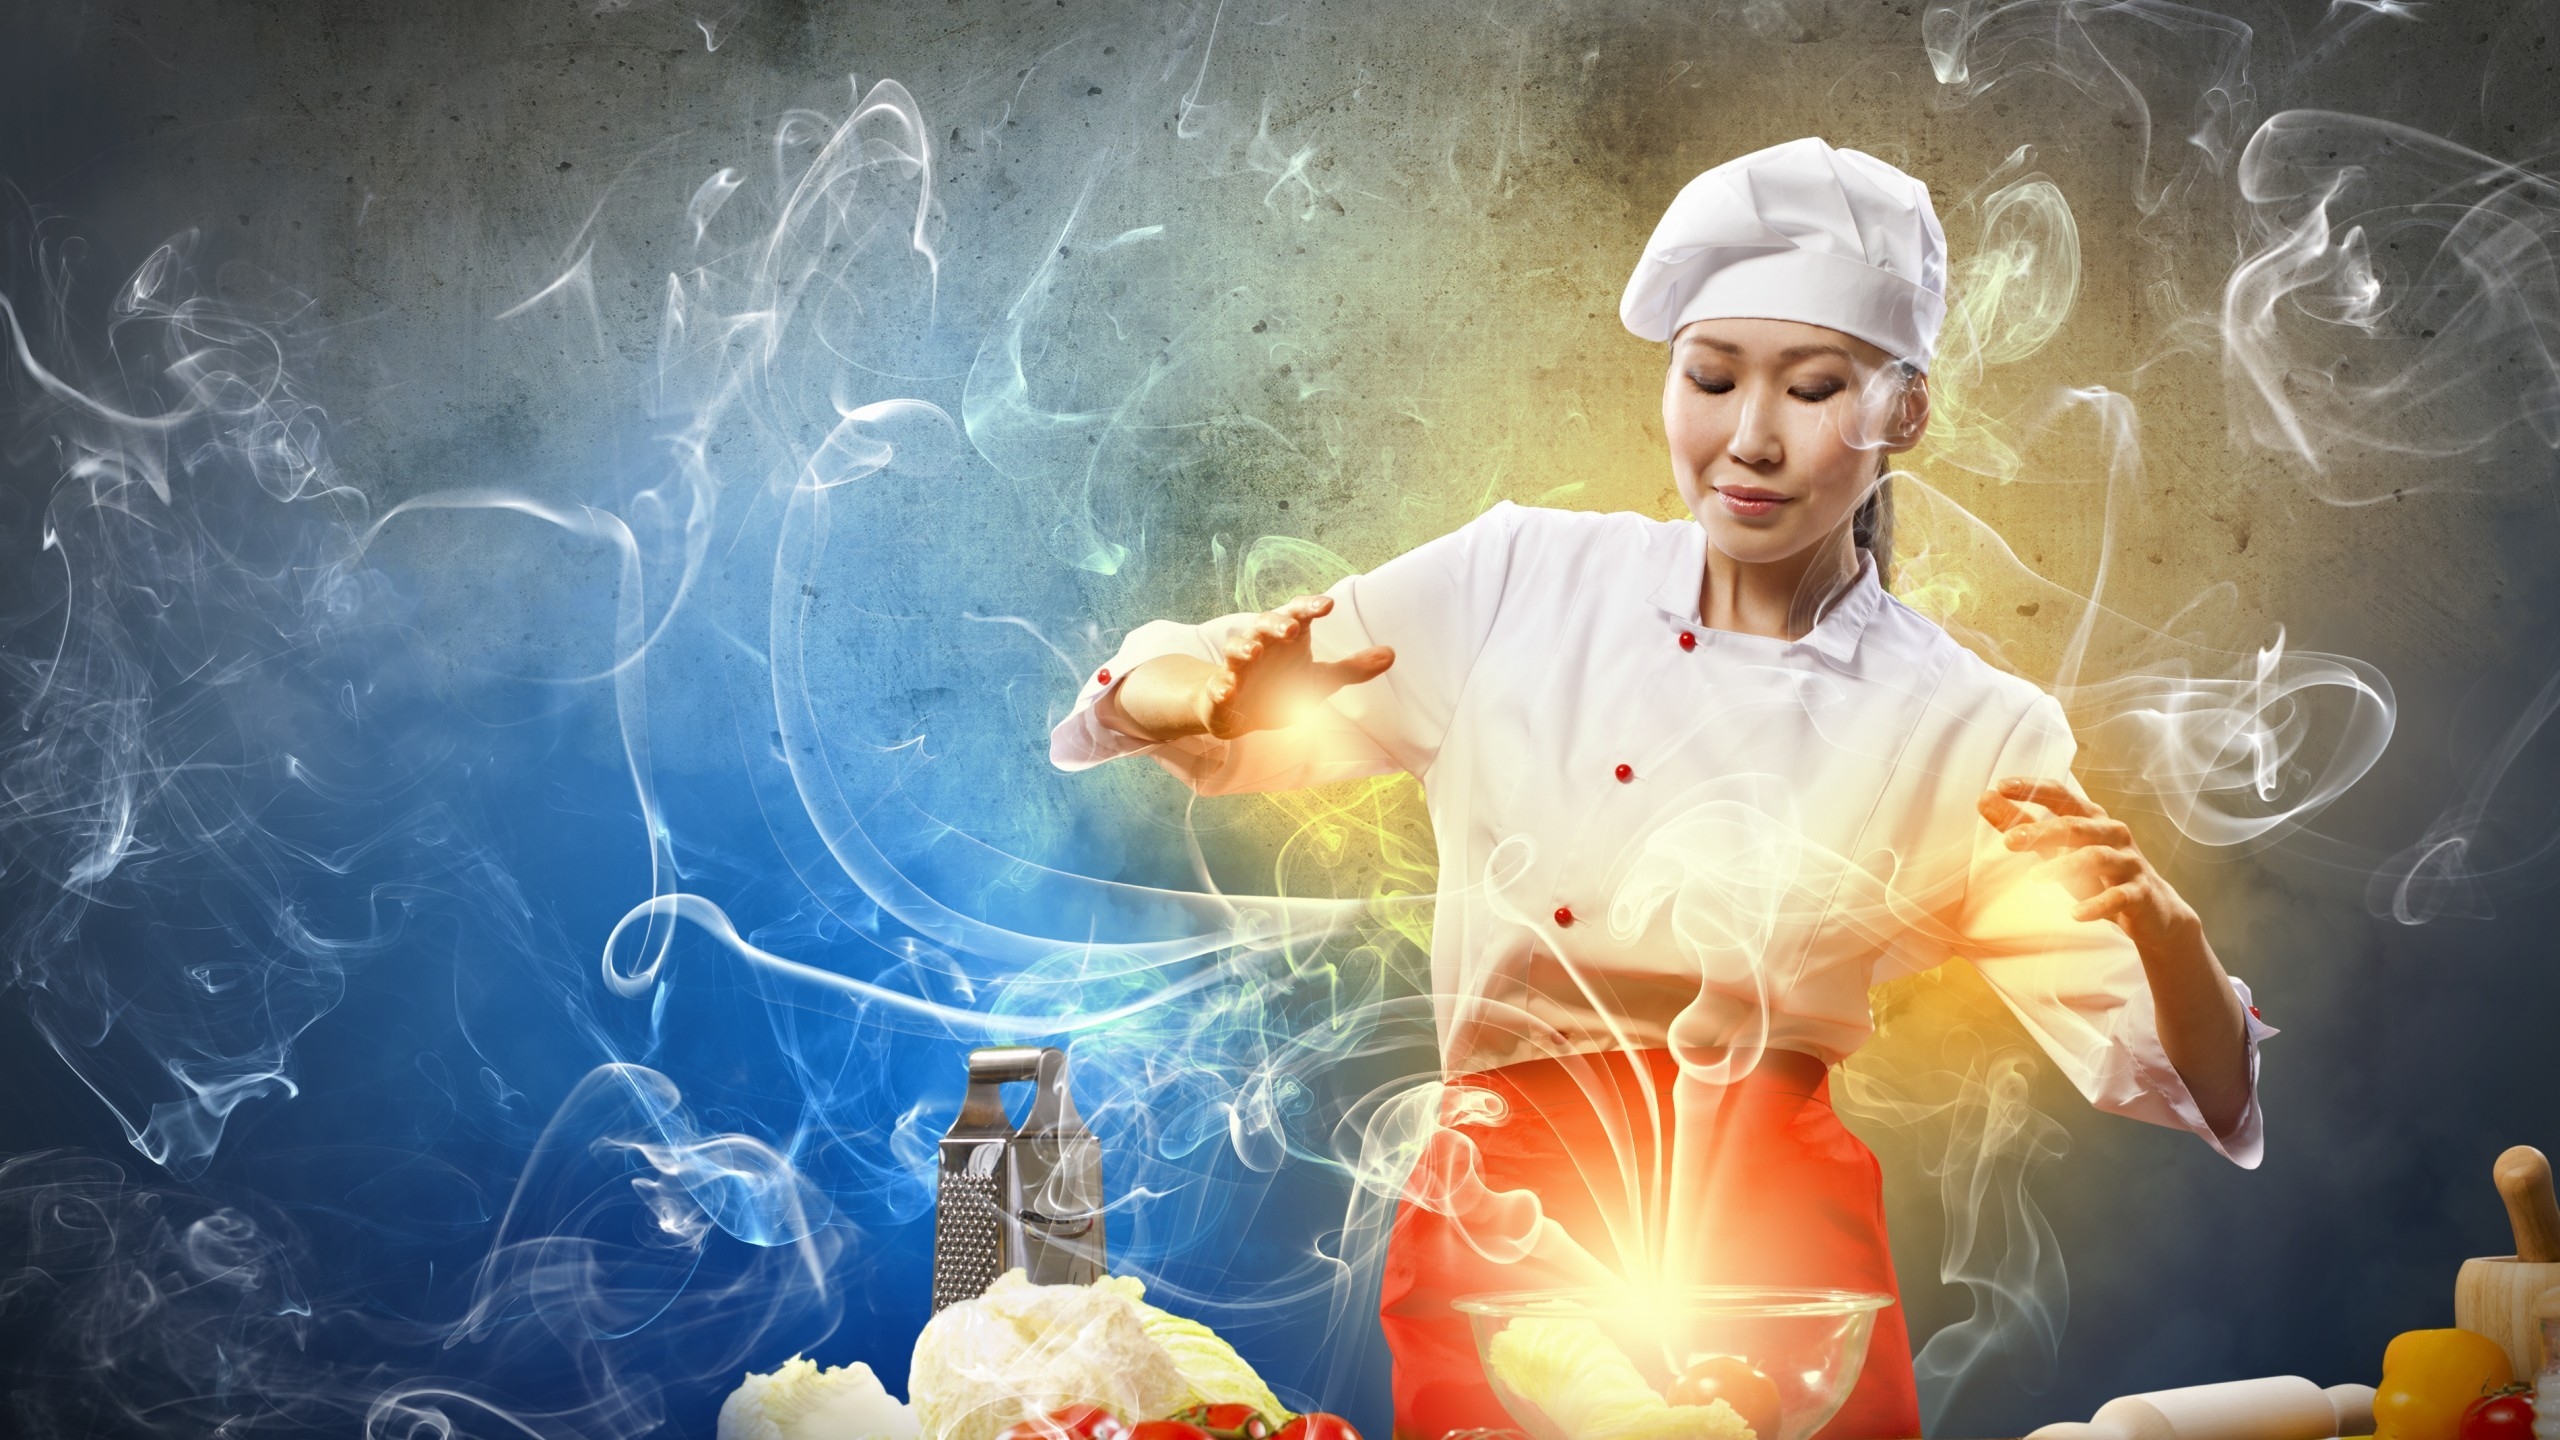 Creative Asian Chef for 2560x1440 HDTV resolution